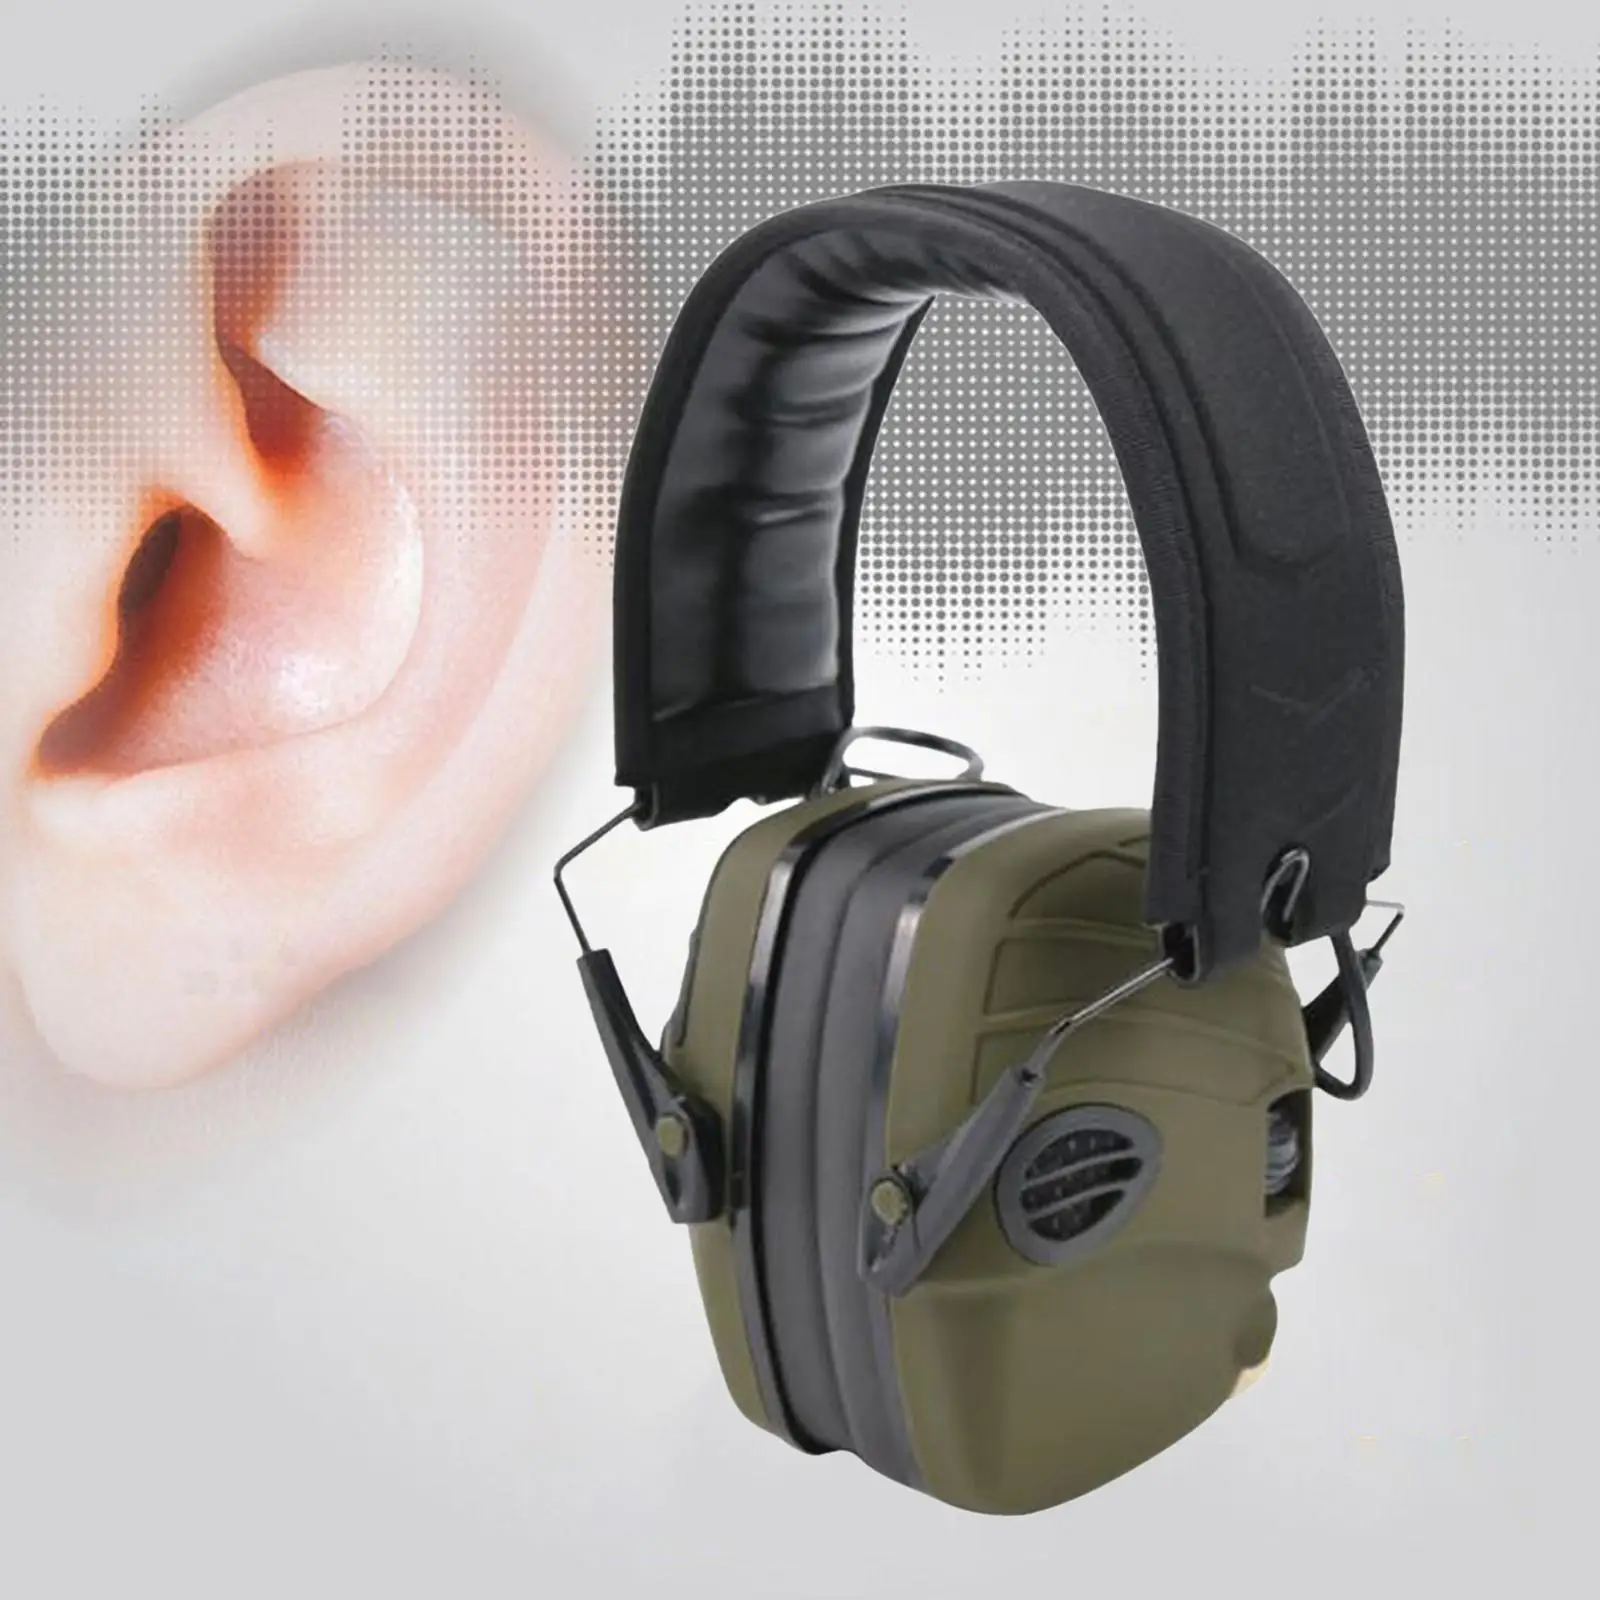 Shooting Safety Earmuffs Noise Reduction Sound Amplification Range Ear Defenders